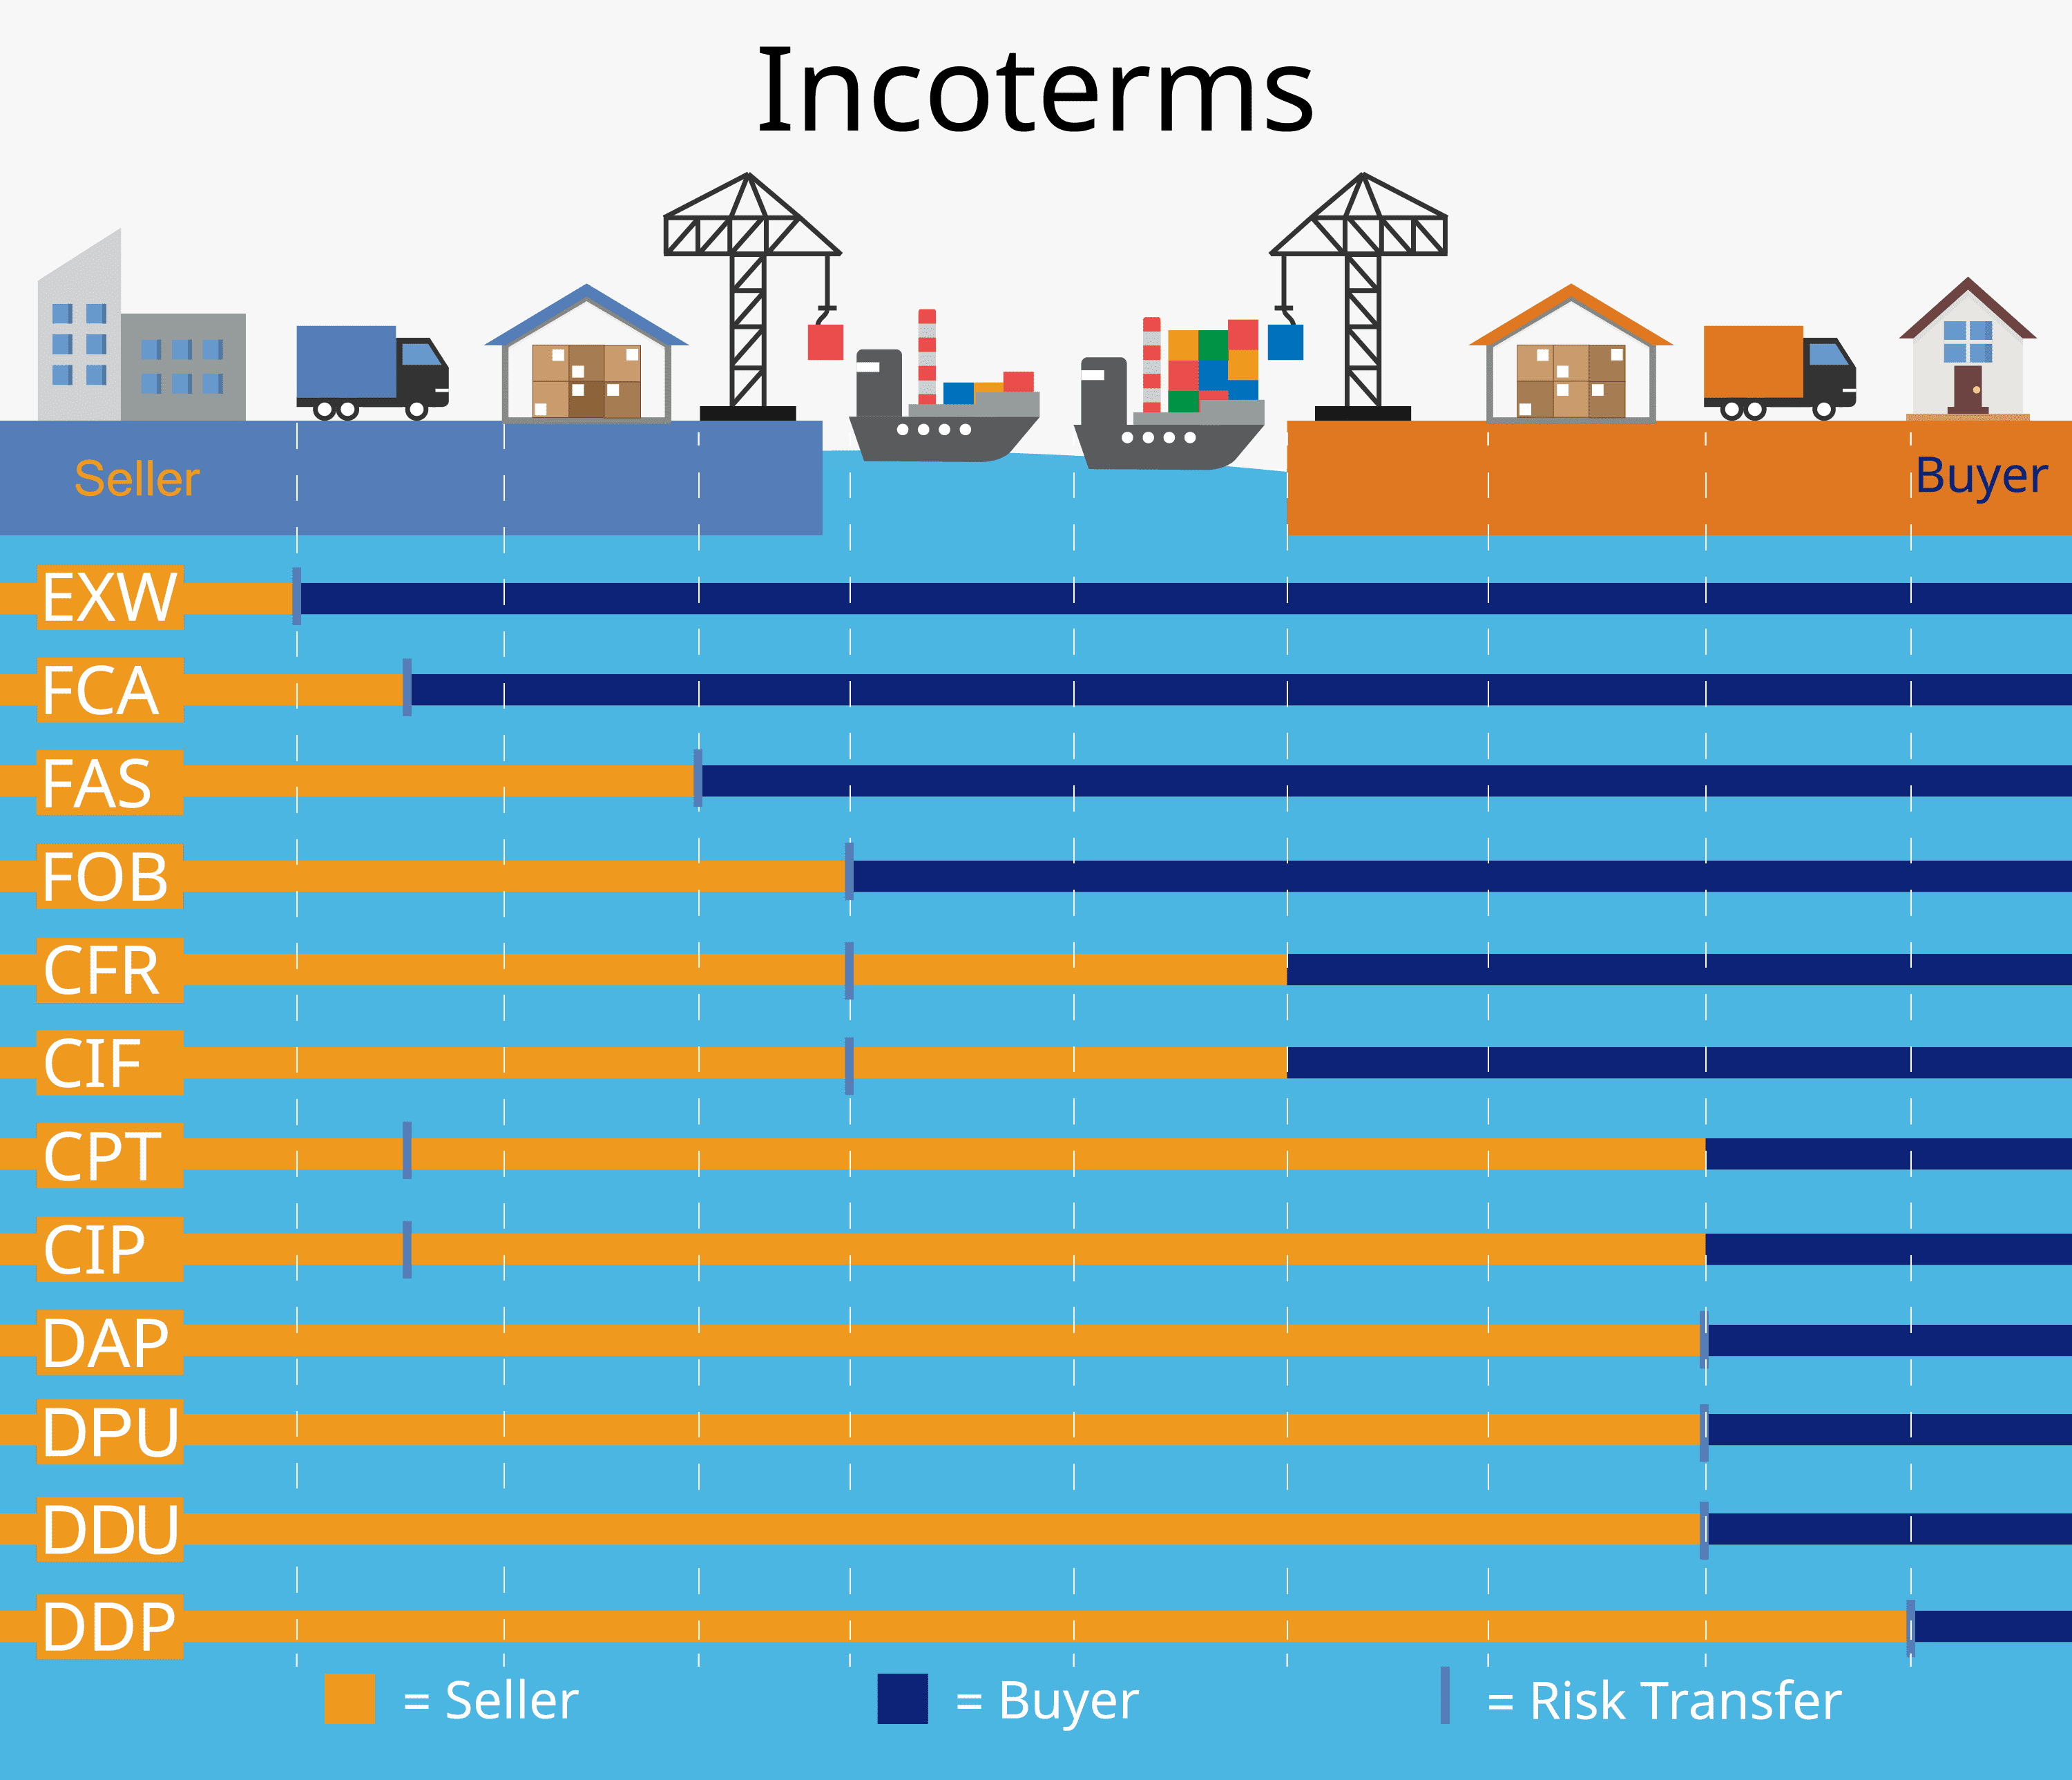 Incoterms types